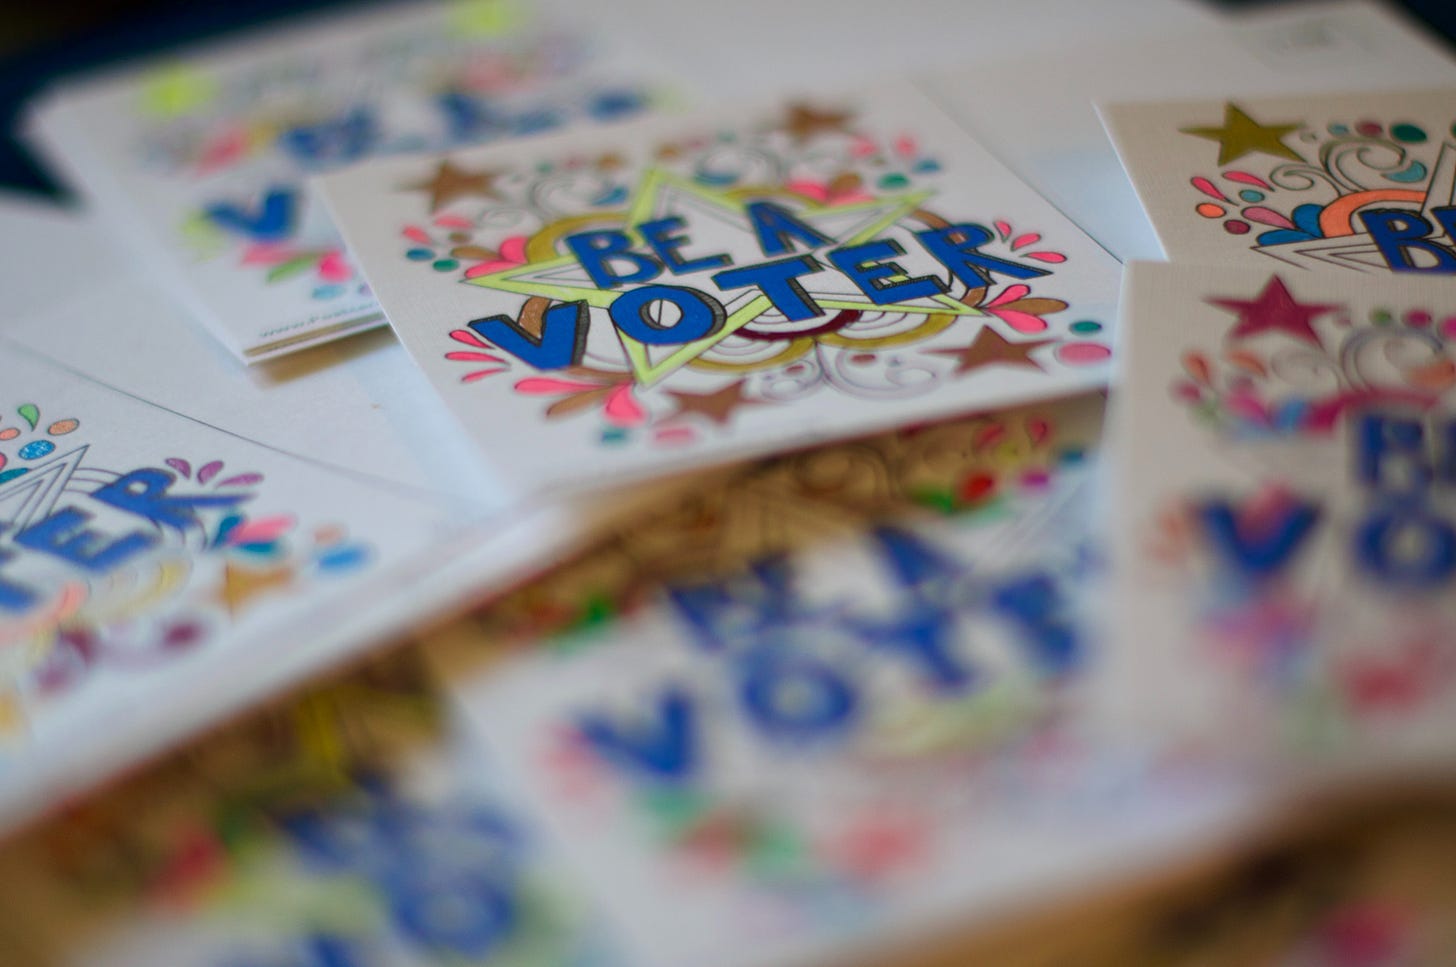 Pile of "Be a Voter" stickers